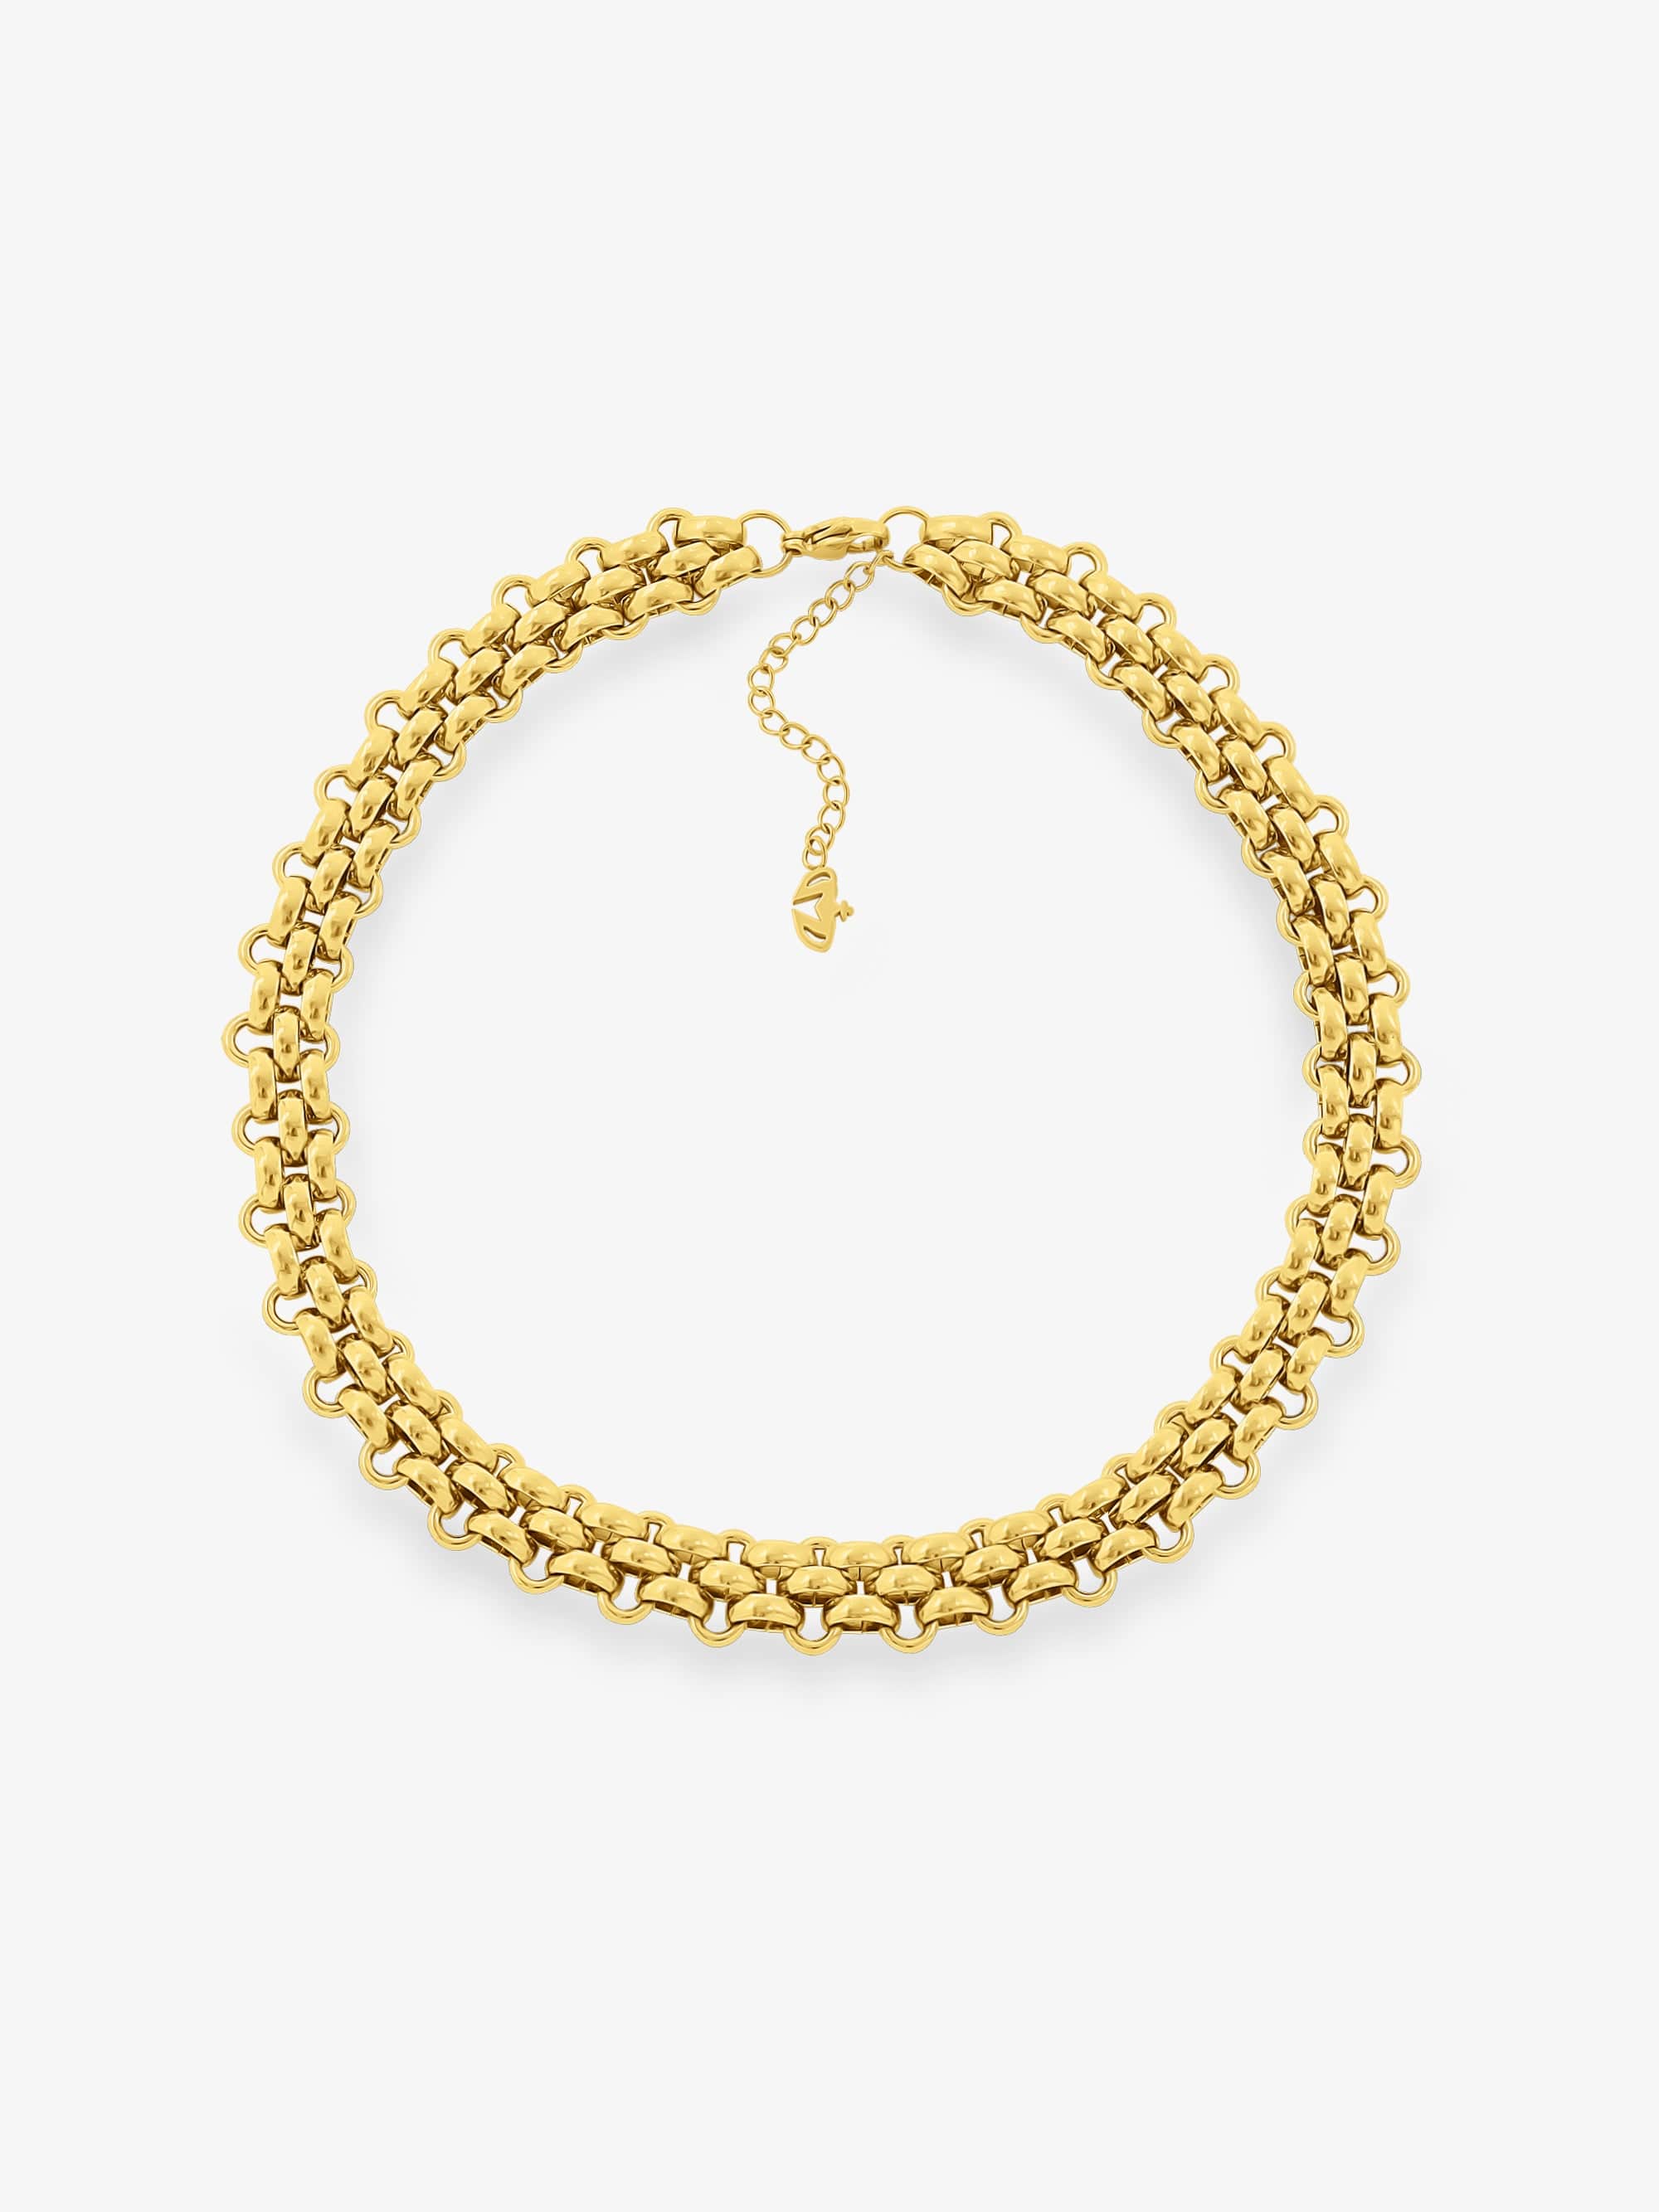 Sultana-Malta CHAINS Panther Link Chain Necklace